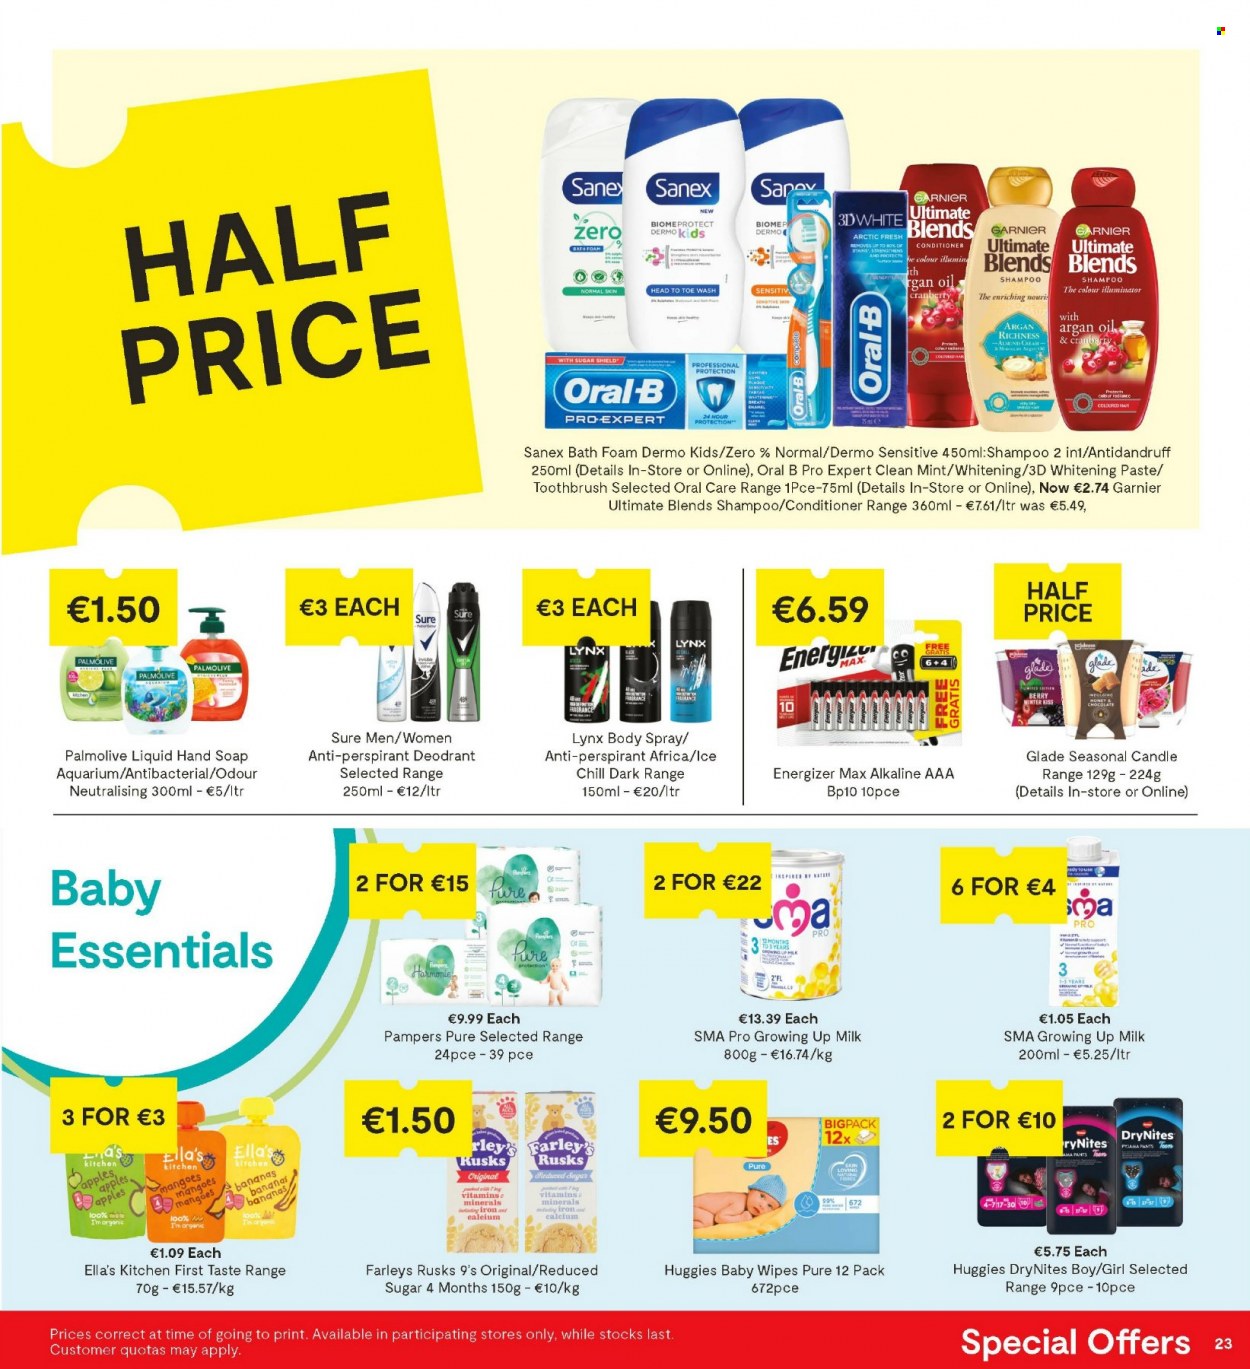 thumbnail - SuperValu offer  - 09.12.2021 - 22.12.2021 - Sales products - rusks, bananas, apples, clams, milk, oil, Ron Pelicano, wipes, Huggies, Pampers, pants, baby wipes, DryNites, shampoo, hand soap, bath foam, Palmolive, soap, toothbrush, Oral-B, Garnier, conditioner, body spray, anti-perspirant, fragrance, Sure, Sanex, candle, Glade, Energizer, aquarium, calcium. Page 23.